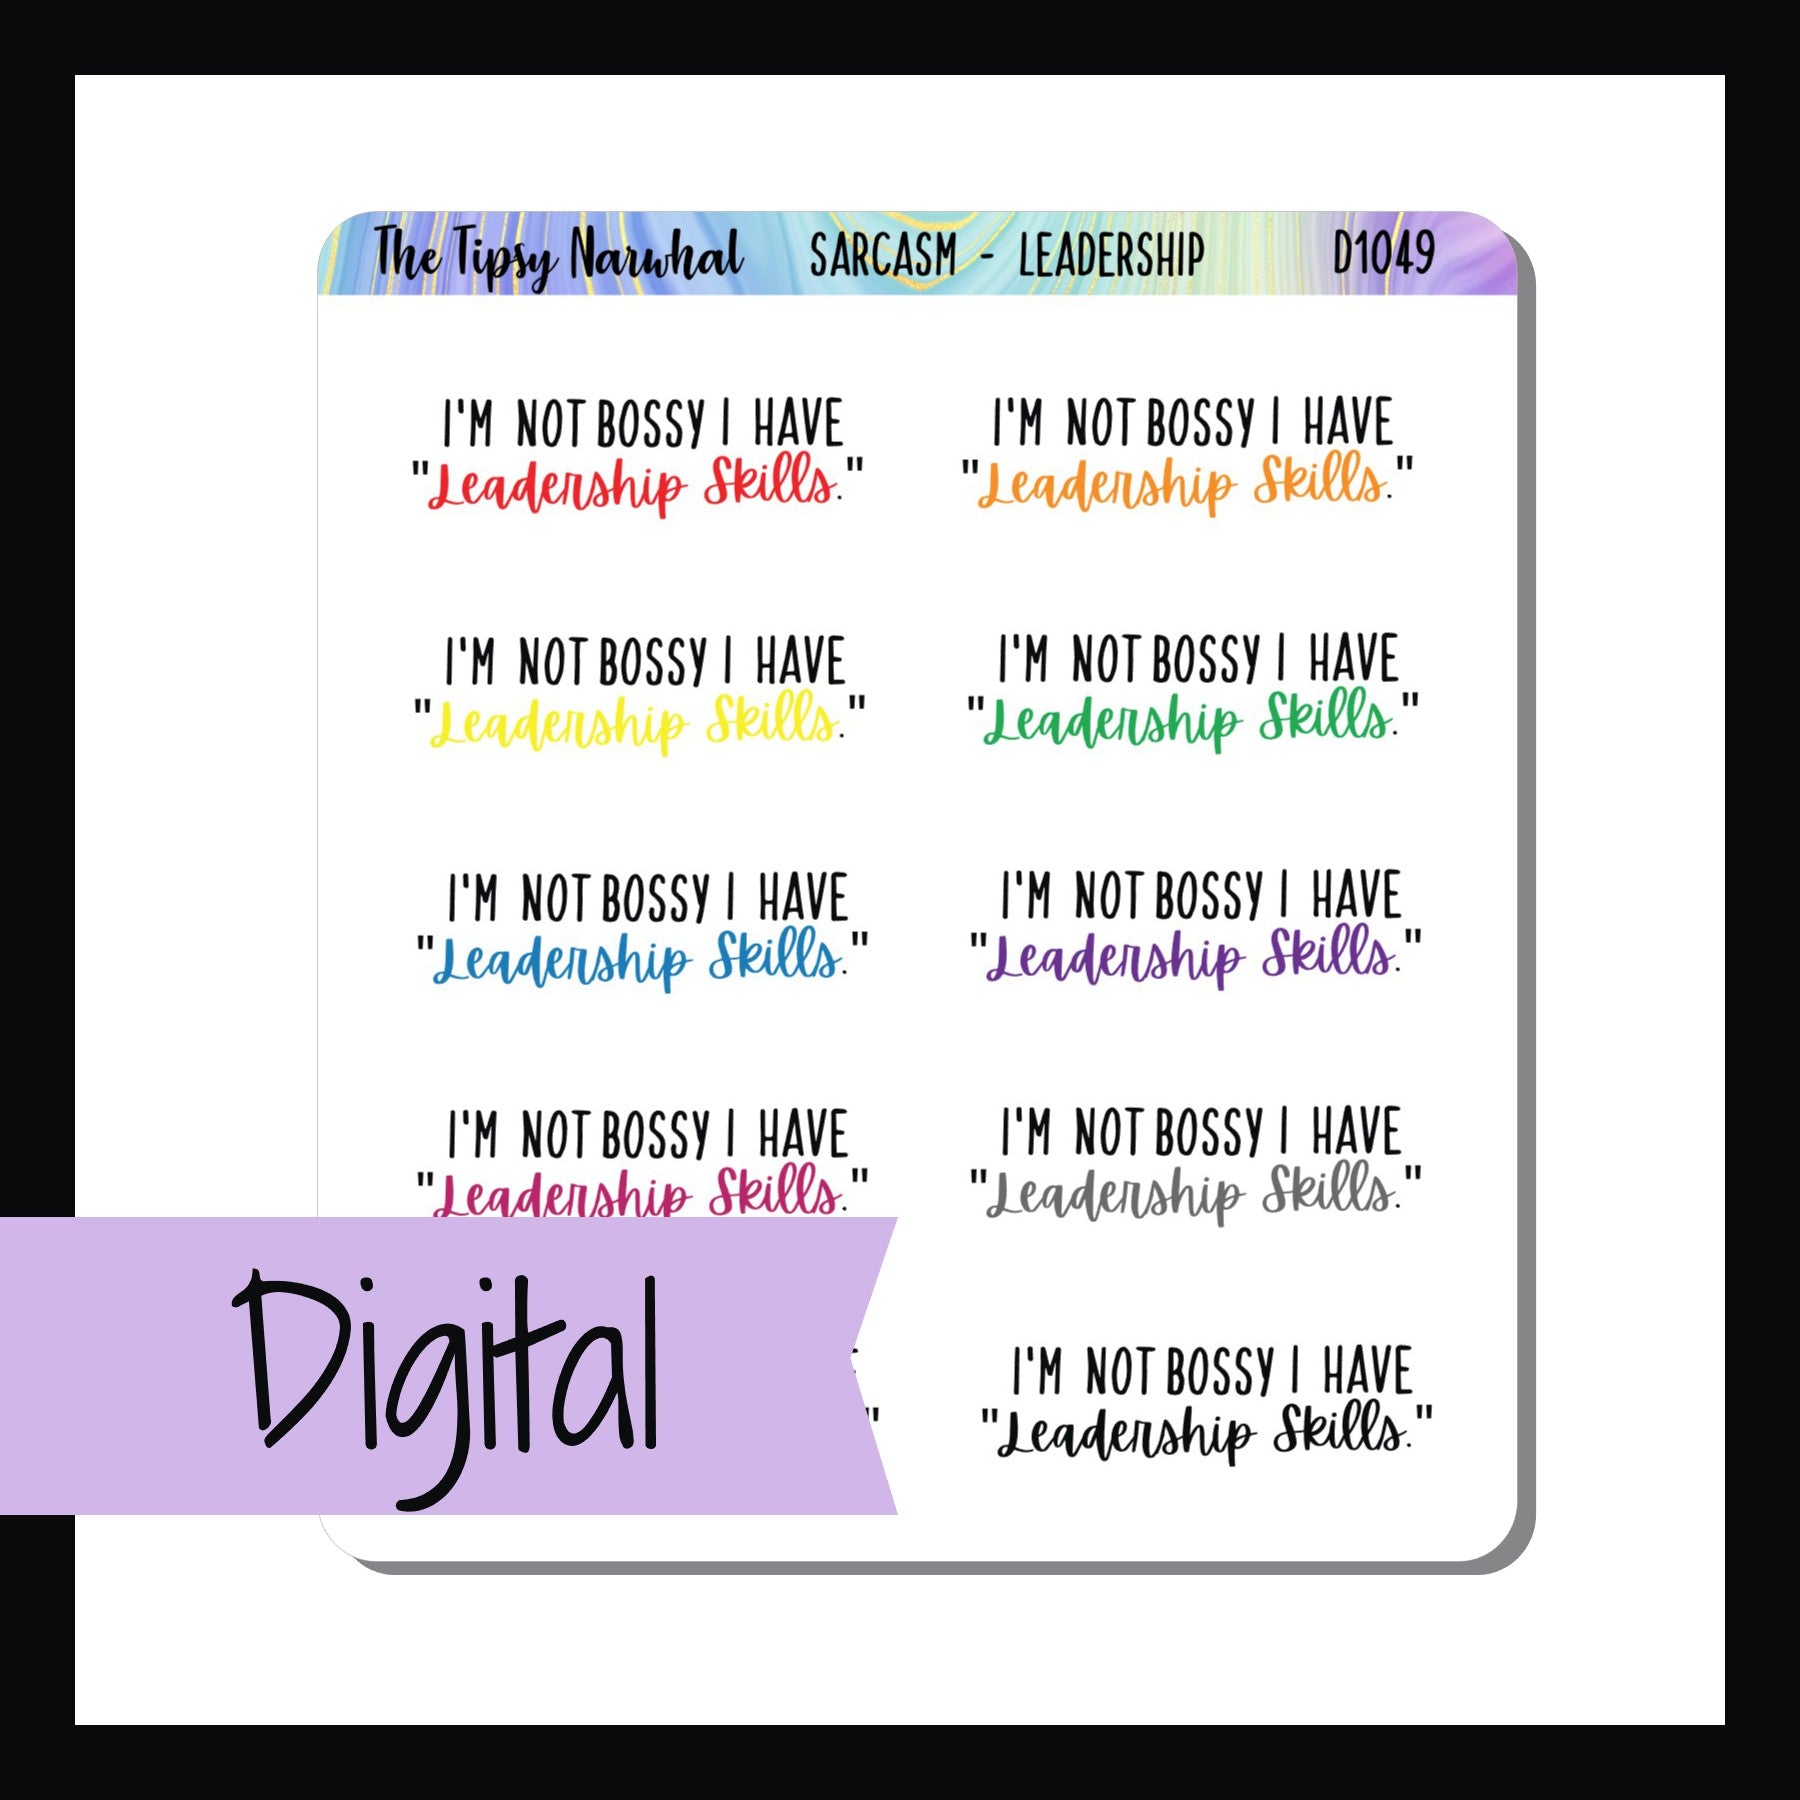 The Digital Leadership Skills Sarcasm Sticker Sheet is a digital and printable version of the Leadership Sarcasm Sticker Sheet.  It features 10 tongue in cheek quotes about leadership skills. 